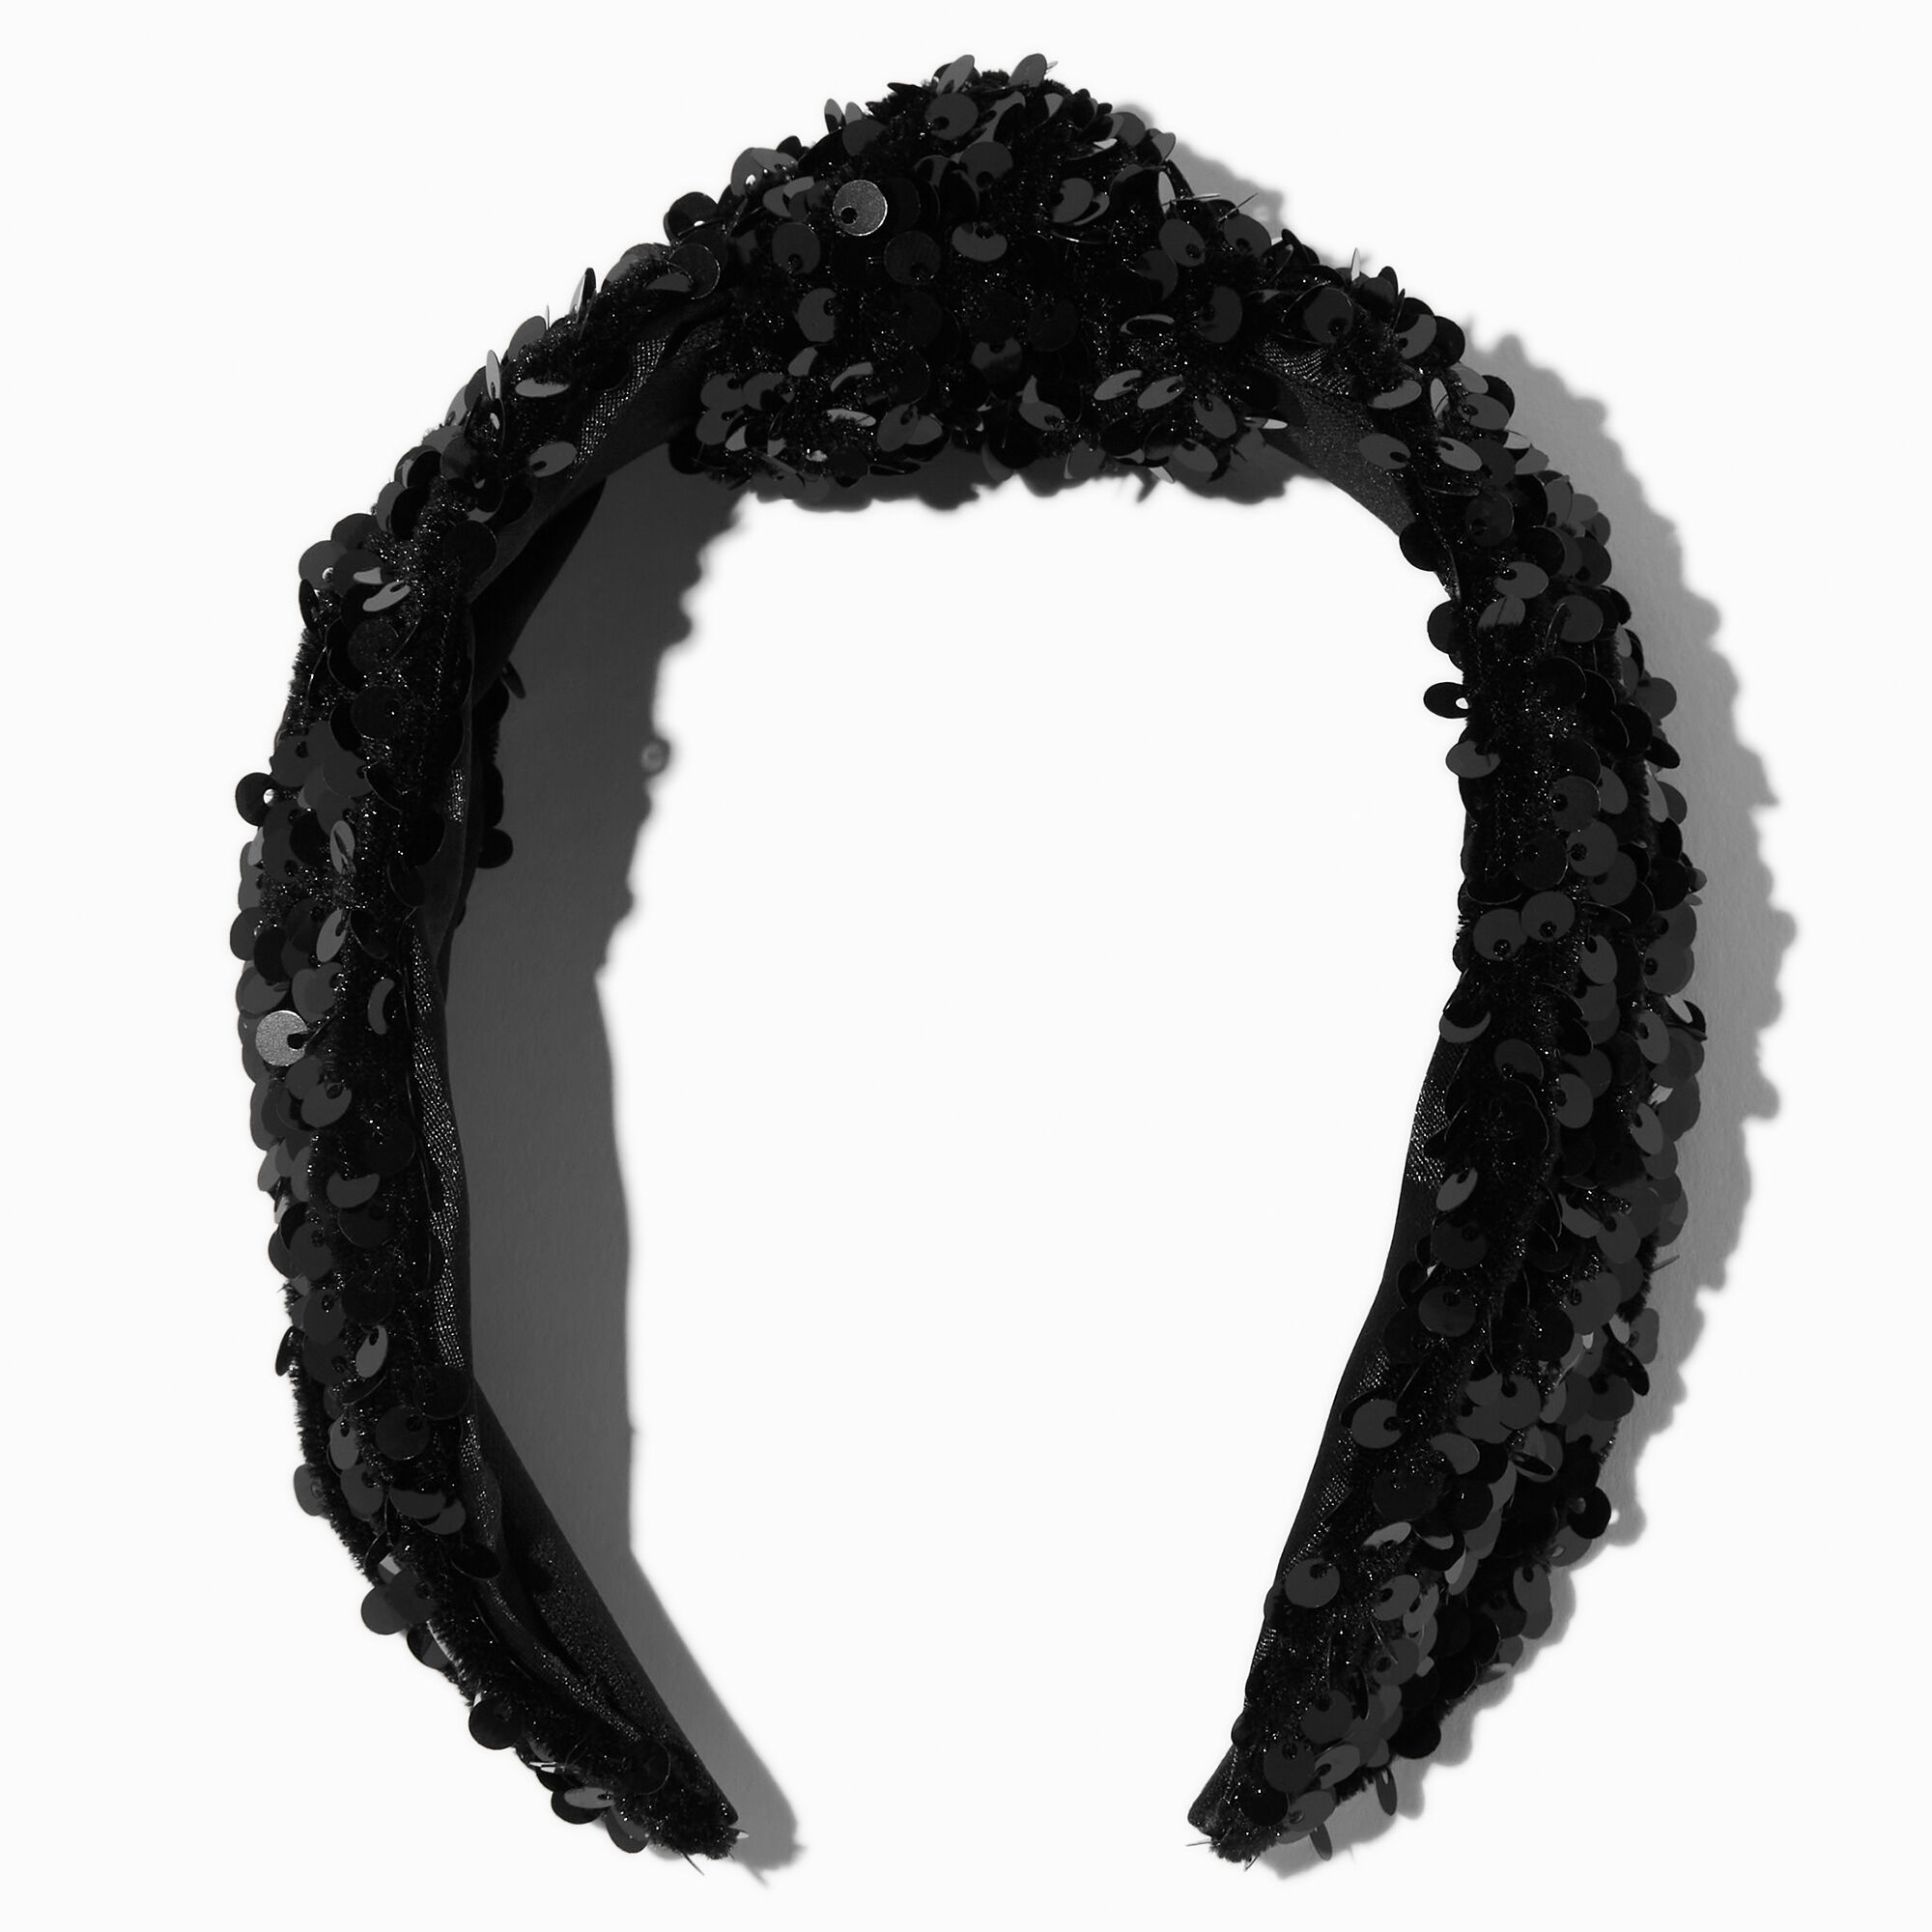 View Claires Sequin Knotted Headband Black information